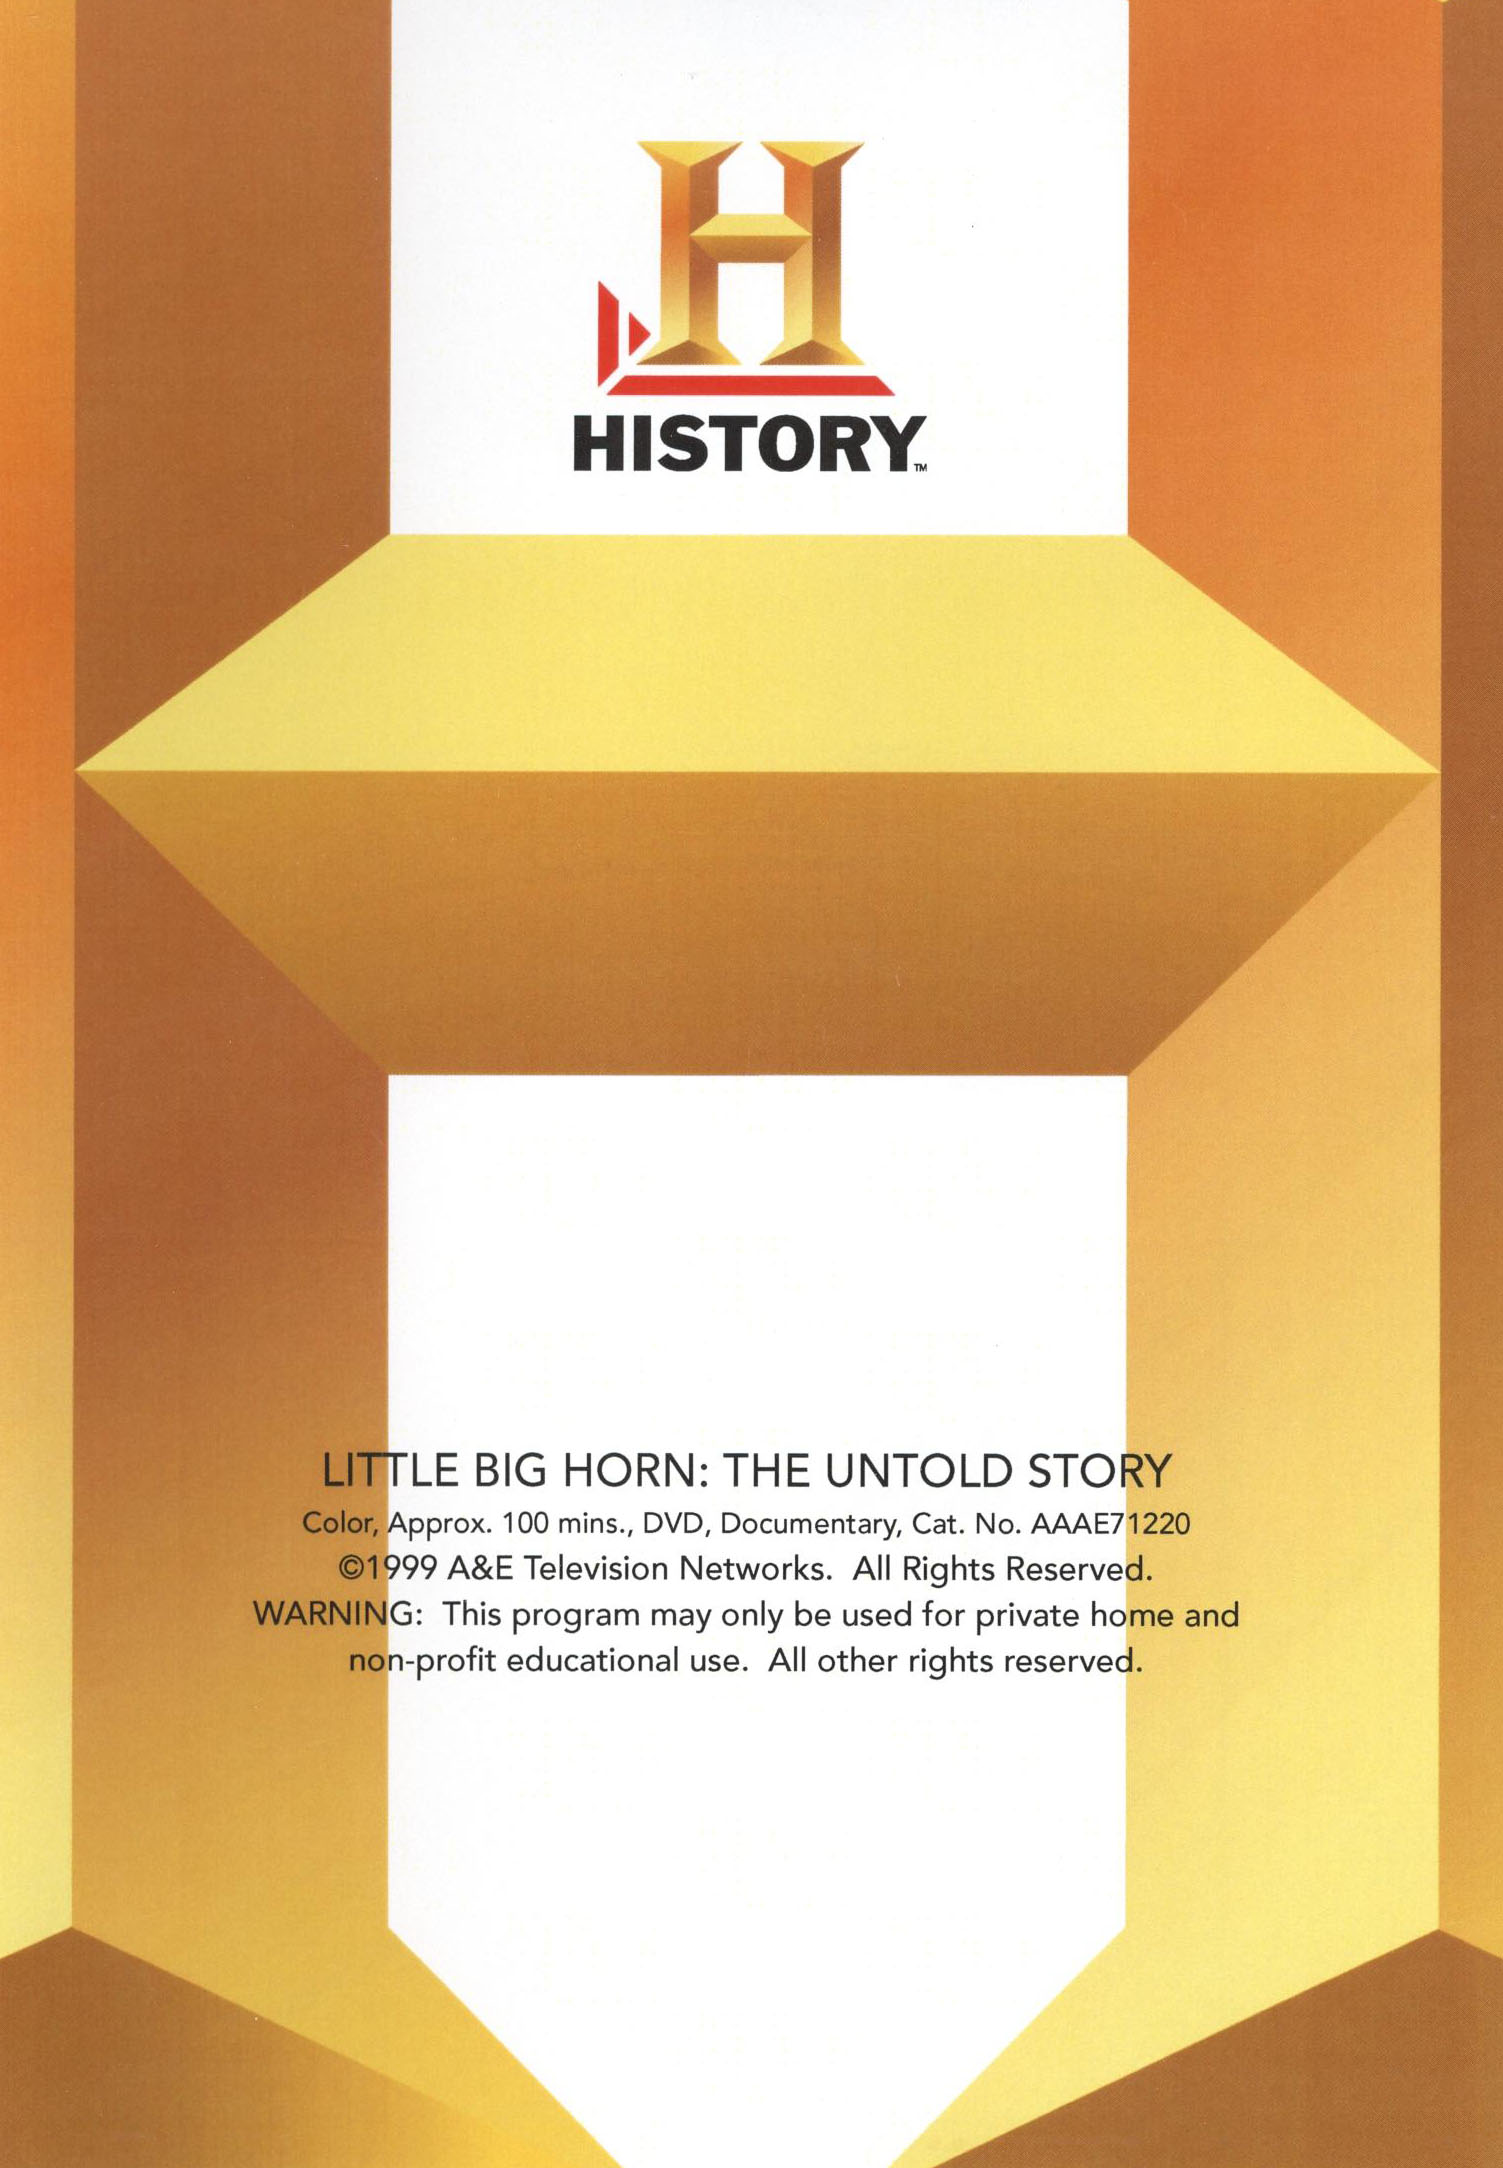 Time Machine: Little Big Horn - The Untold Story [DVD] [1999]